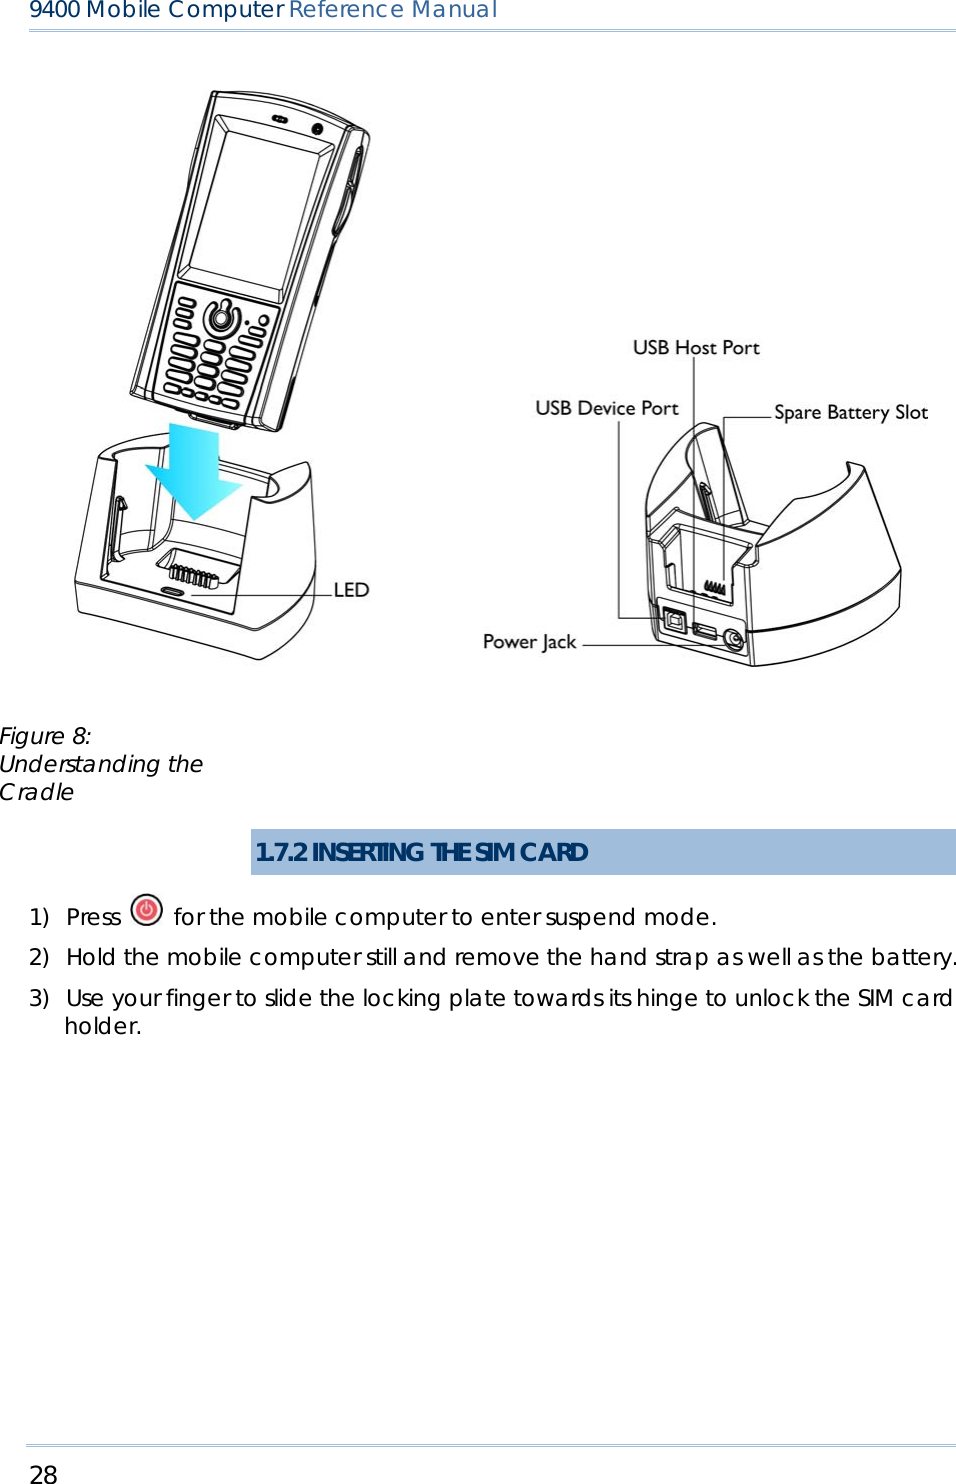 28  9400 Mobile Computer Reference Manual               1.7.2 INSERTING THE SIM CARD 1) Press   for the mobile computer to enter suspend mode. 2) Hold the mobile computer still and remove the hand strap as well as the battery. 3) Use your finger to slide the locking plate towards its hinge to unlock the SIM card holder. Figure 8: Understanding the Cradle 